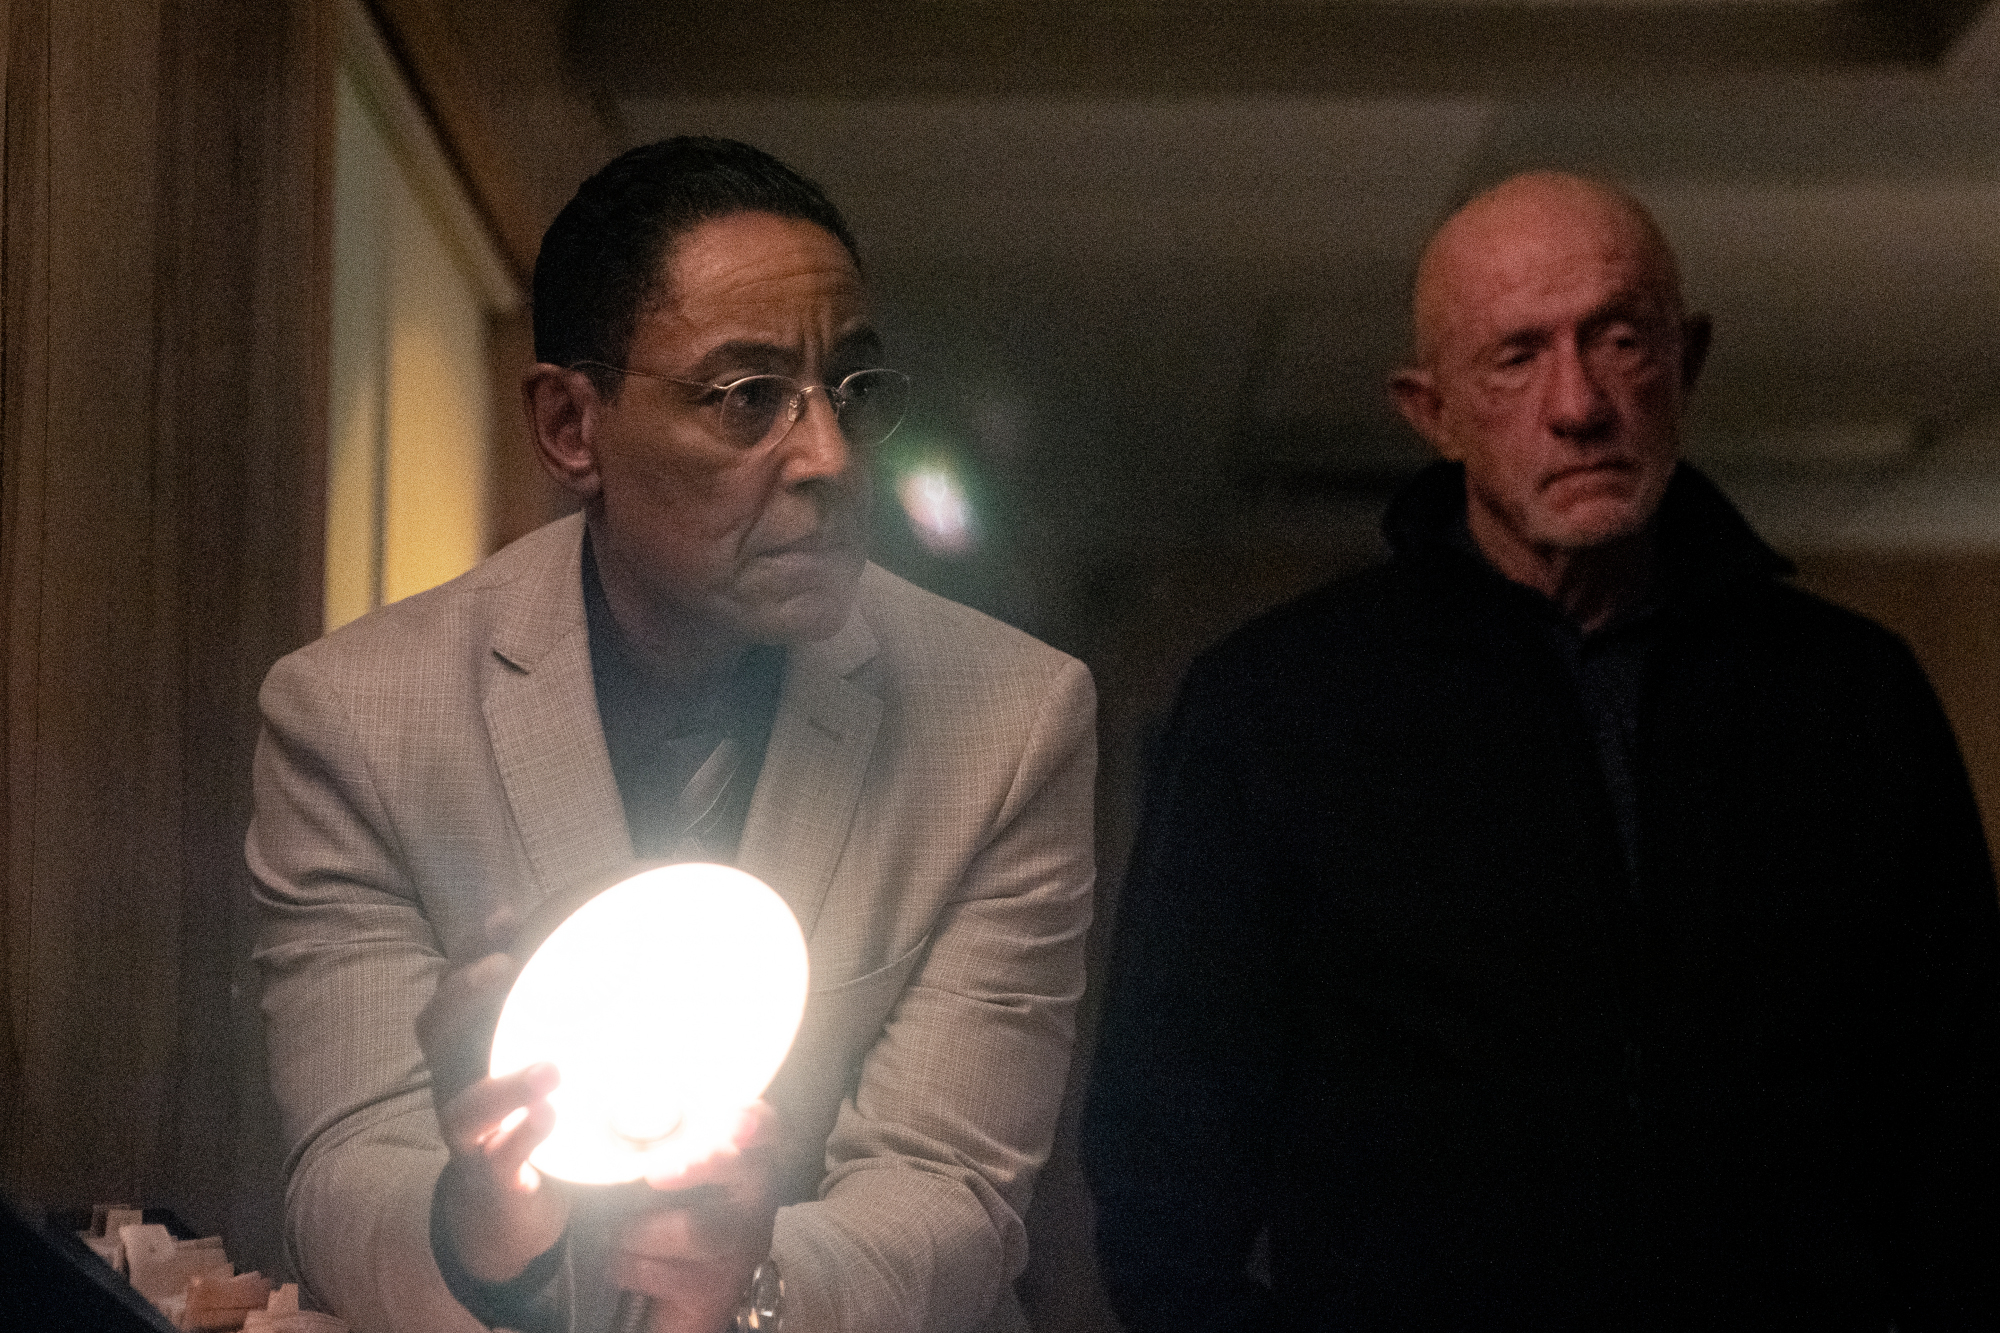 Giancarlo Esposito and Jonathan Banks as Gus and Mike in 'Better Call Saul' Season 6. Gus is holding a flashlight and they're looking at something.